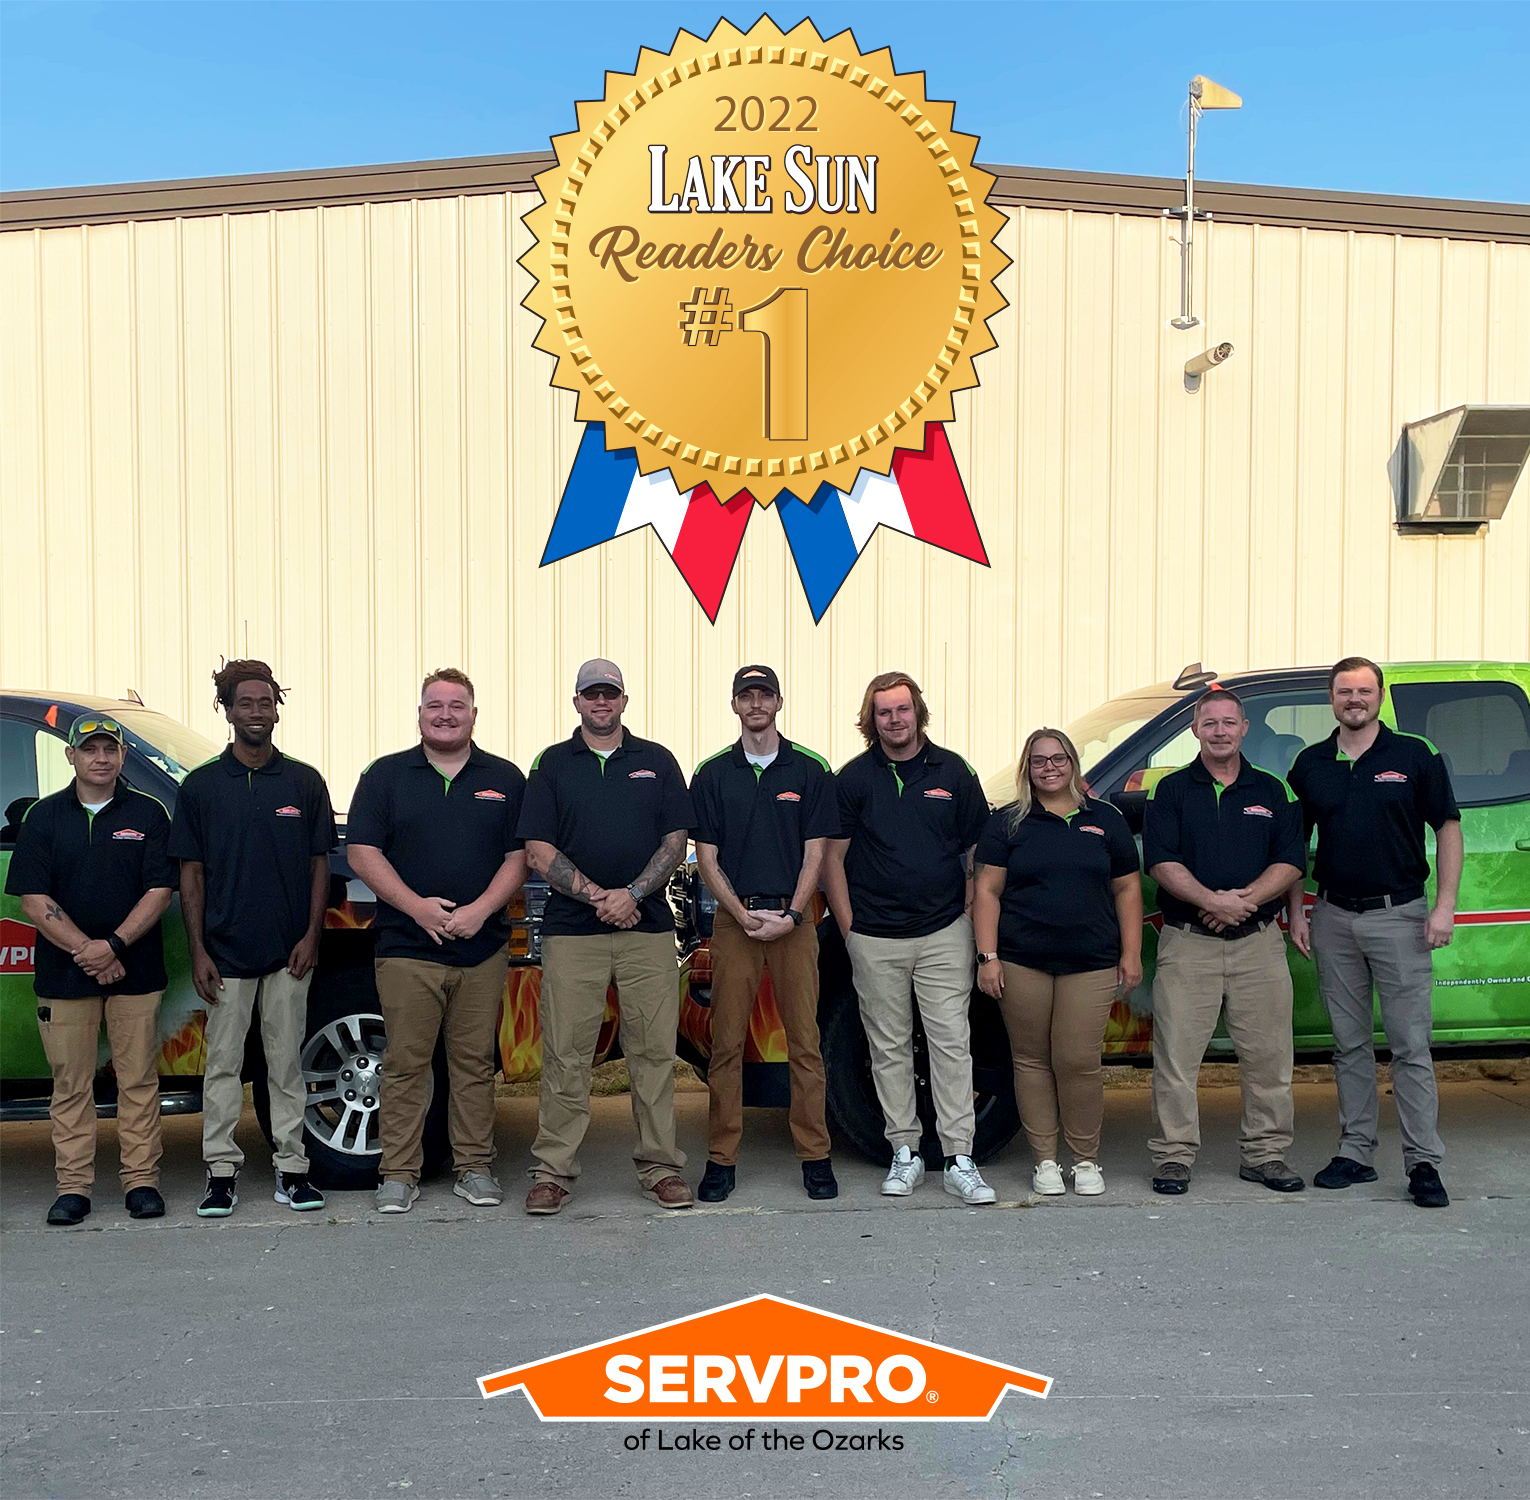 SERVPRO of Lake of the Ozarks is so proud to be voted as the #1 Restoration company by Lake Sun readers! Our team will be recognized at the 27th annual Lake Sun Readers Choice Party.